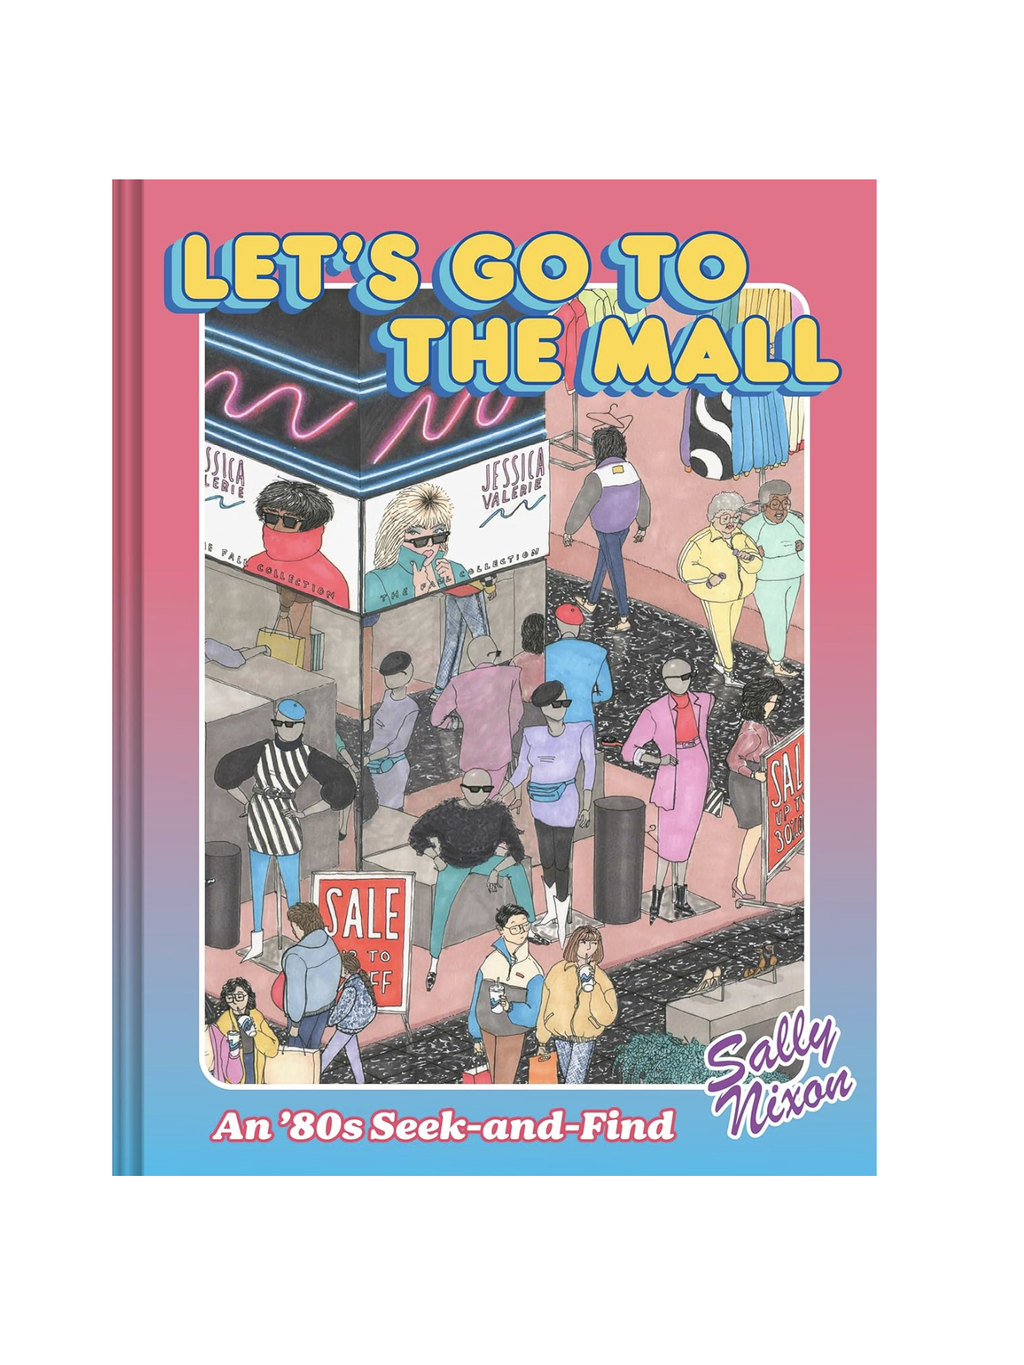 Let's Go to the Mall: An ’80s Seek-and-Find